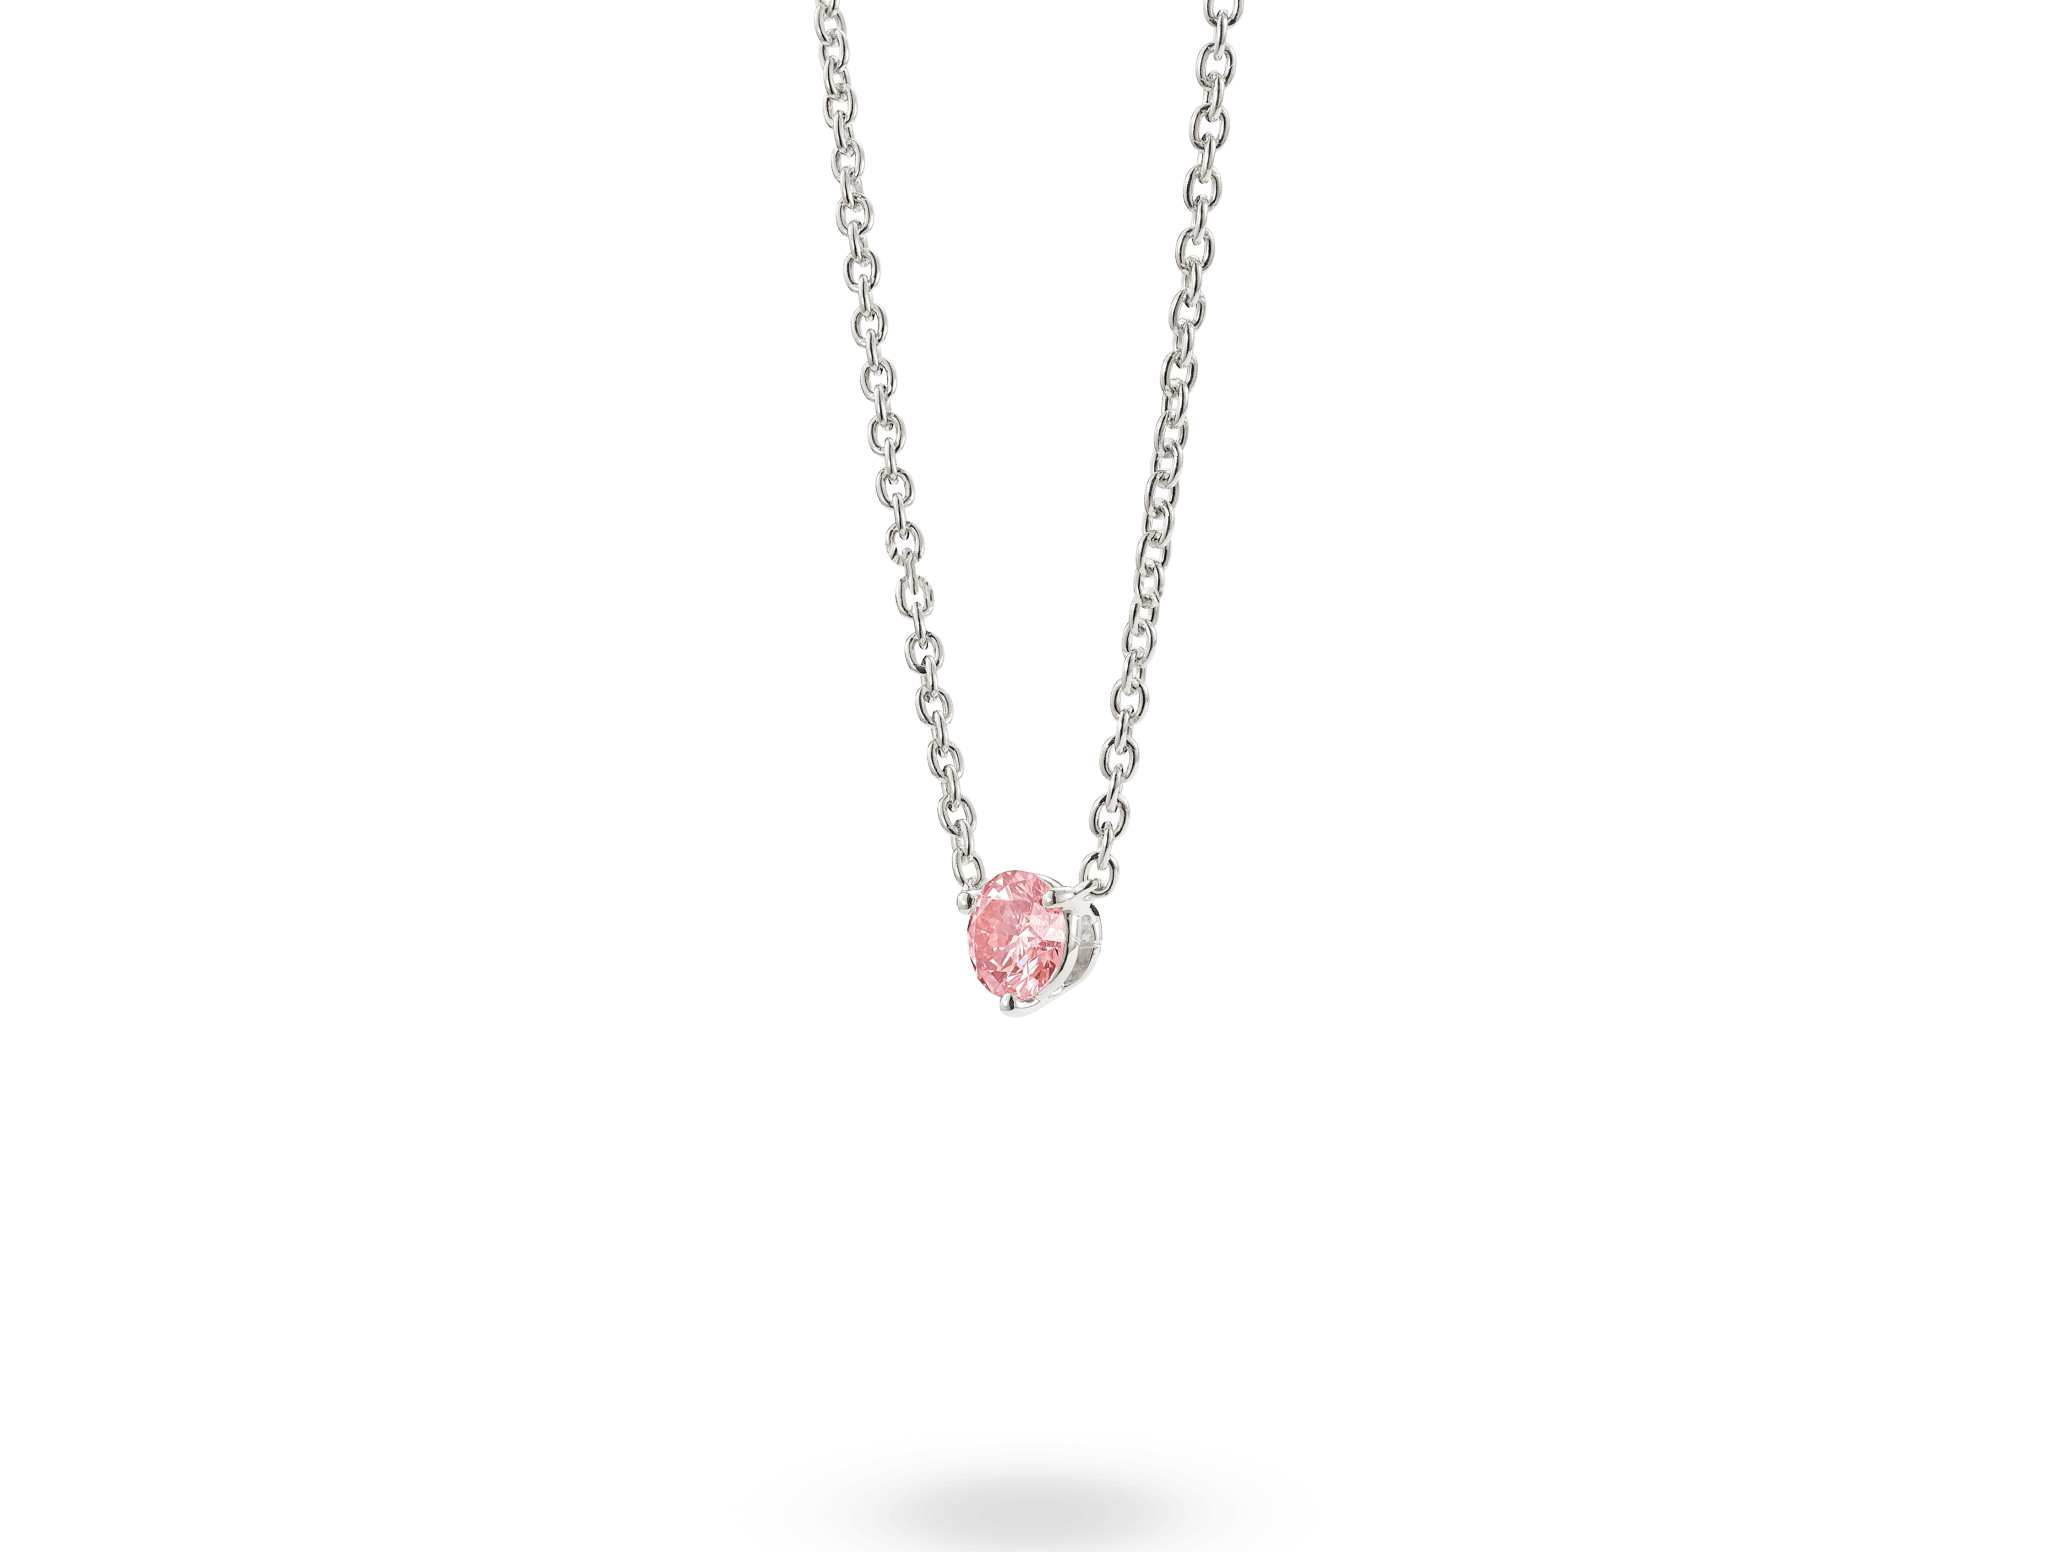 Buy 10 Carat Lab Grown Diamond Tennis Necklace 14k White Gold, 16 Inches,  Eternity Diamond Necklace, Bespoke Anniversary Gifts, Raven Jewelers Online  in India - Etsy